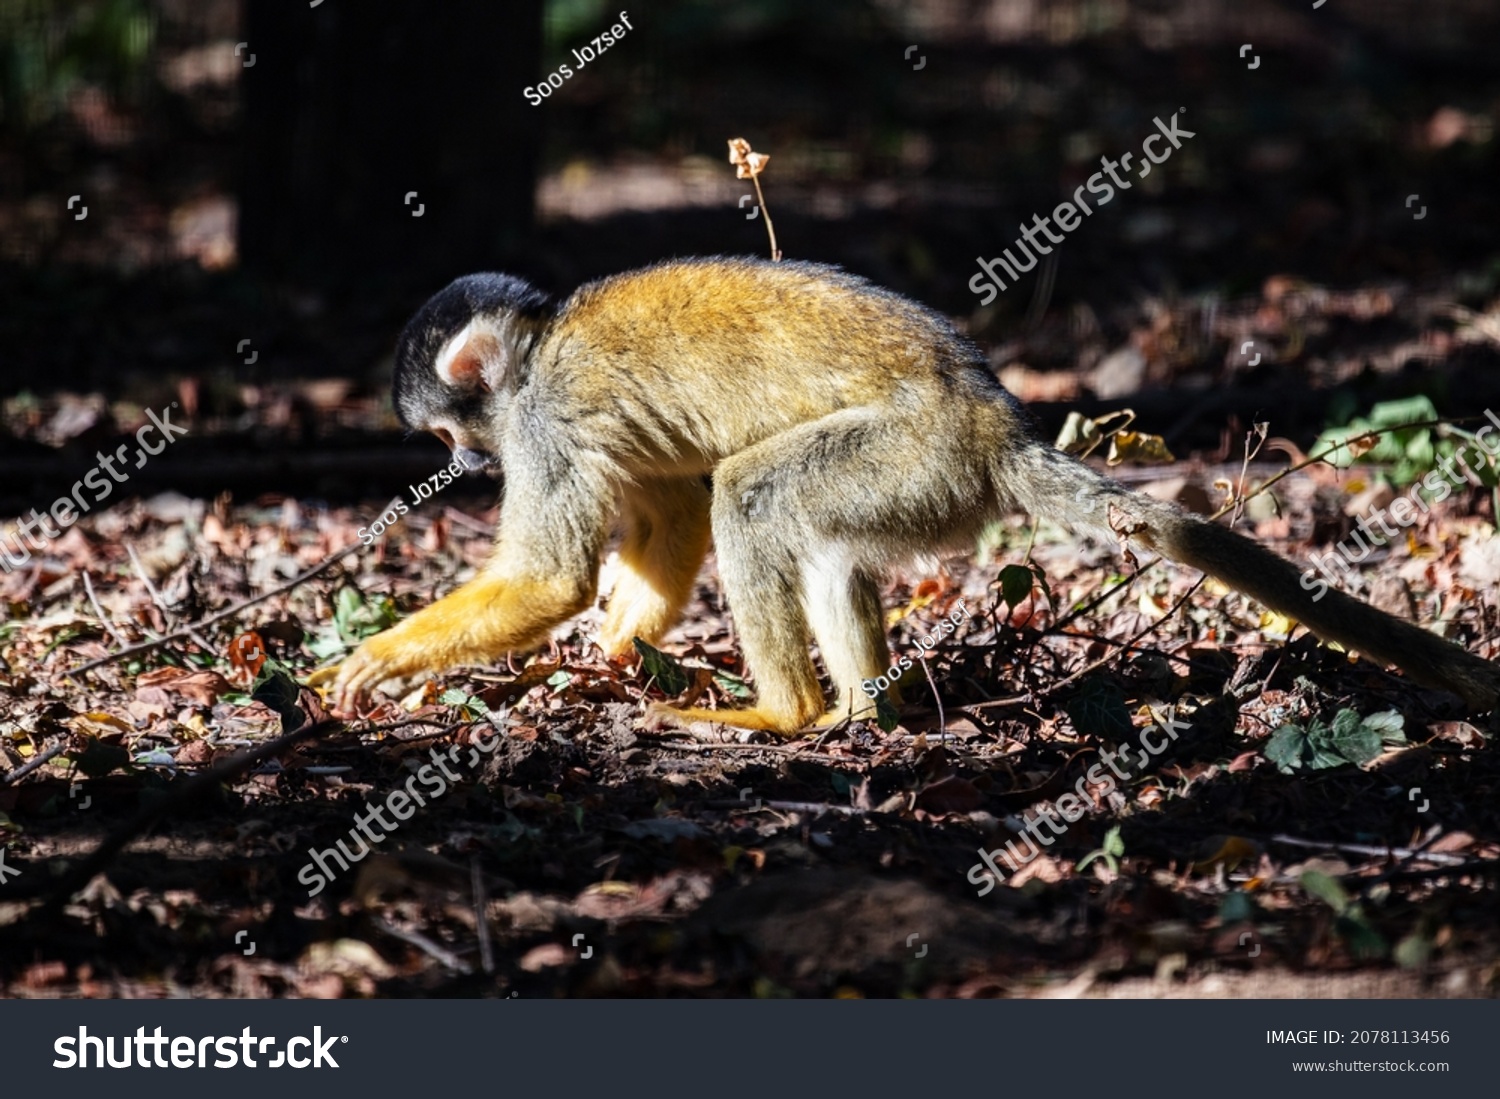 Bolivian Squirrel Monkey. Mammal and mammals. Land world and fauna. Wildlife and zoology. Nature and animal photography. #2078113456